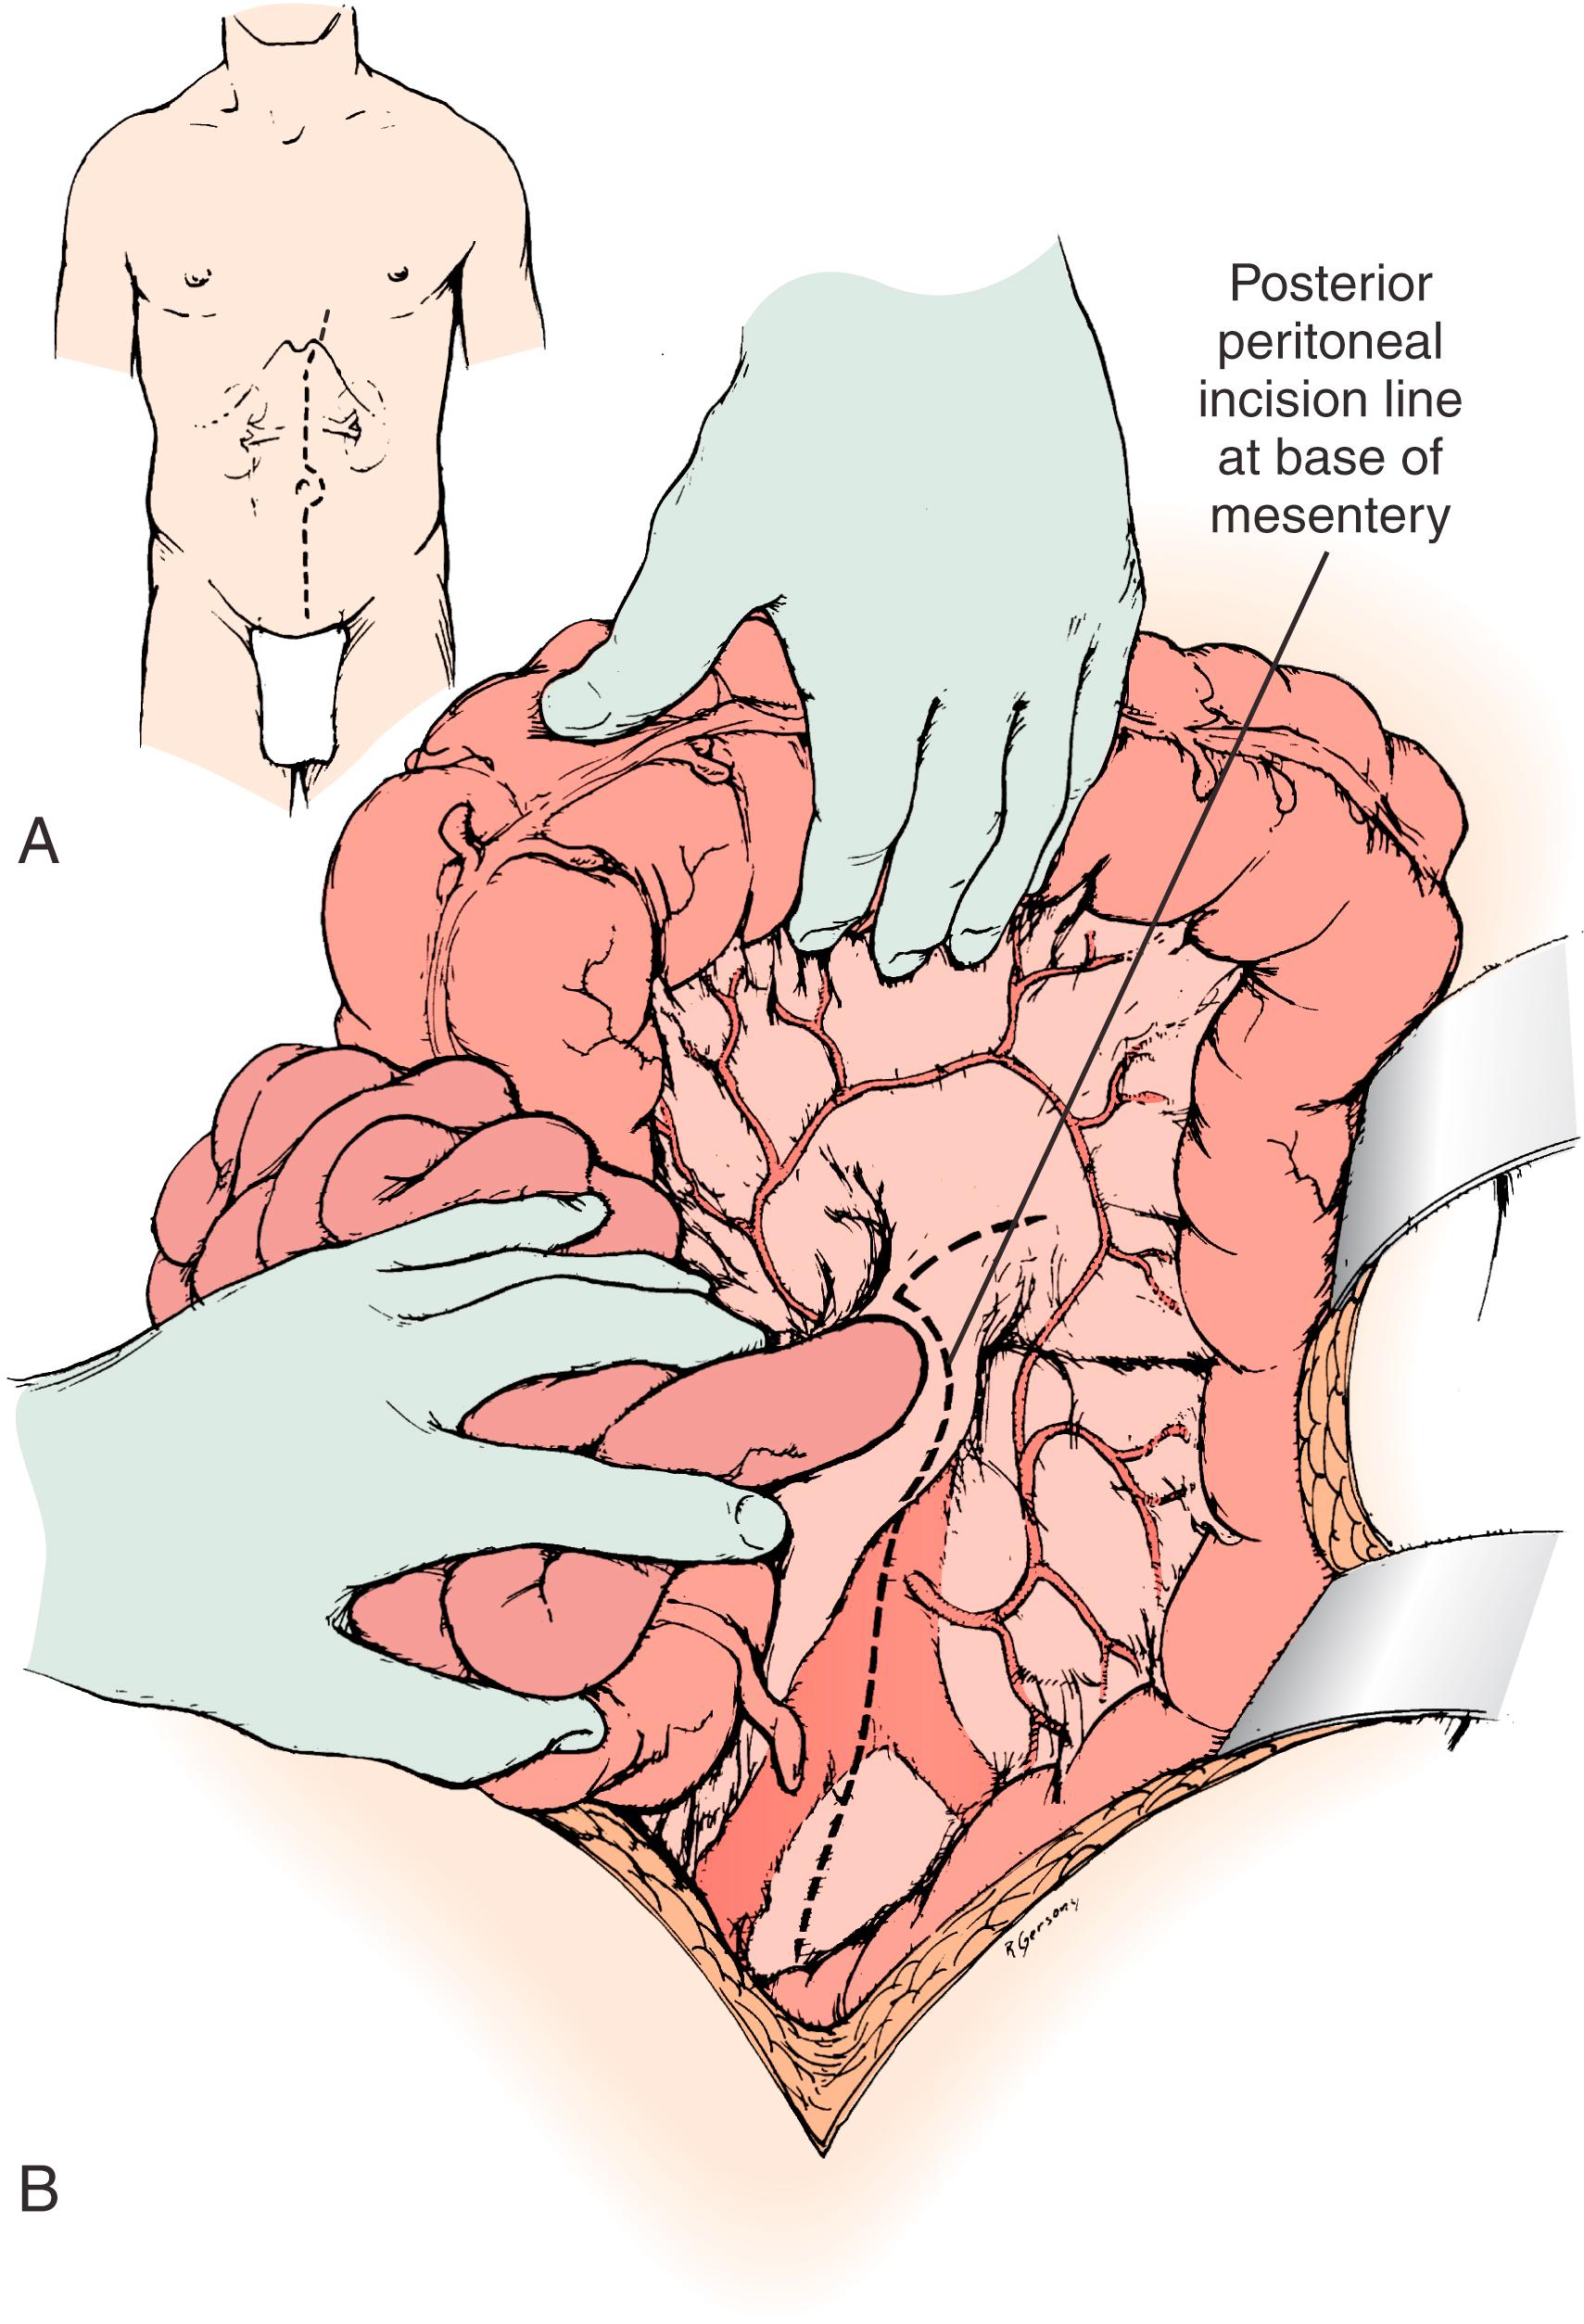 Figure 128.2, ( A and B ) Exposure of the aorta and left renal hilum through the base of the mesentery. Extension of the posterior peritoneal incision to the left, along the inferior border of the pancreas, provides entry to an avascular plane posterior to the pancreas. This allows excellent exposure of the entire left renal vein and hilum as well as of the proximal right renal artery.